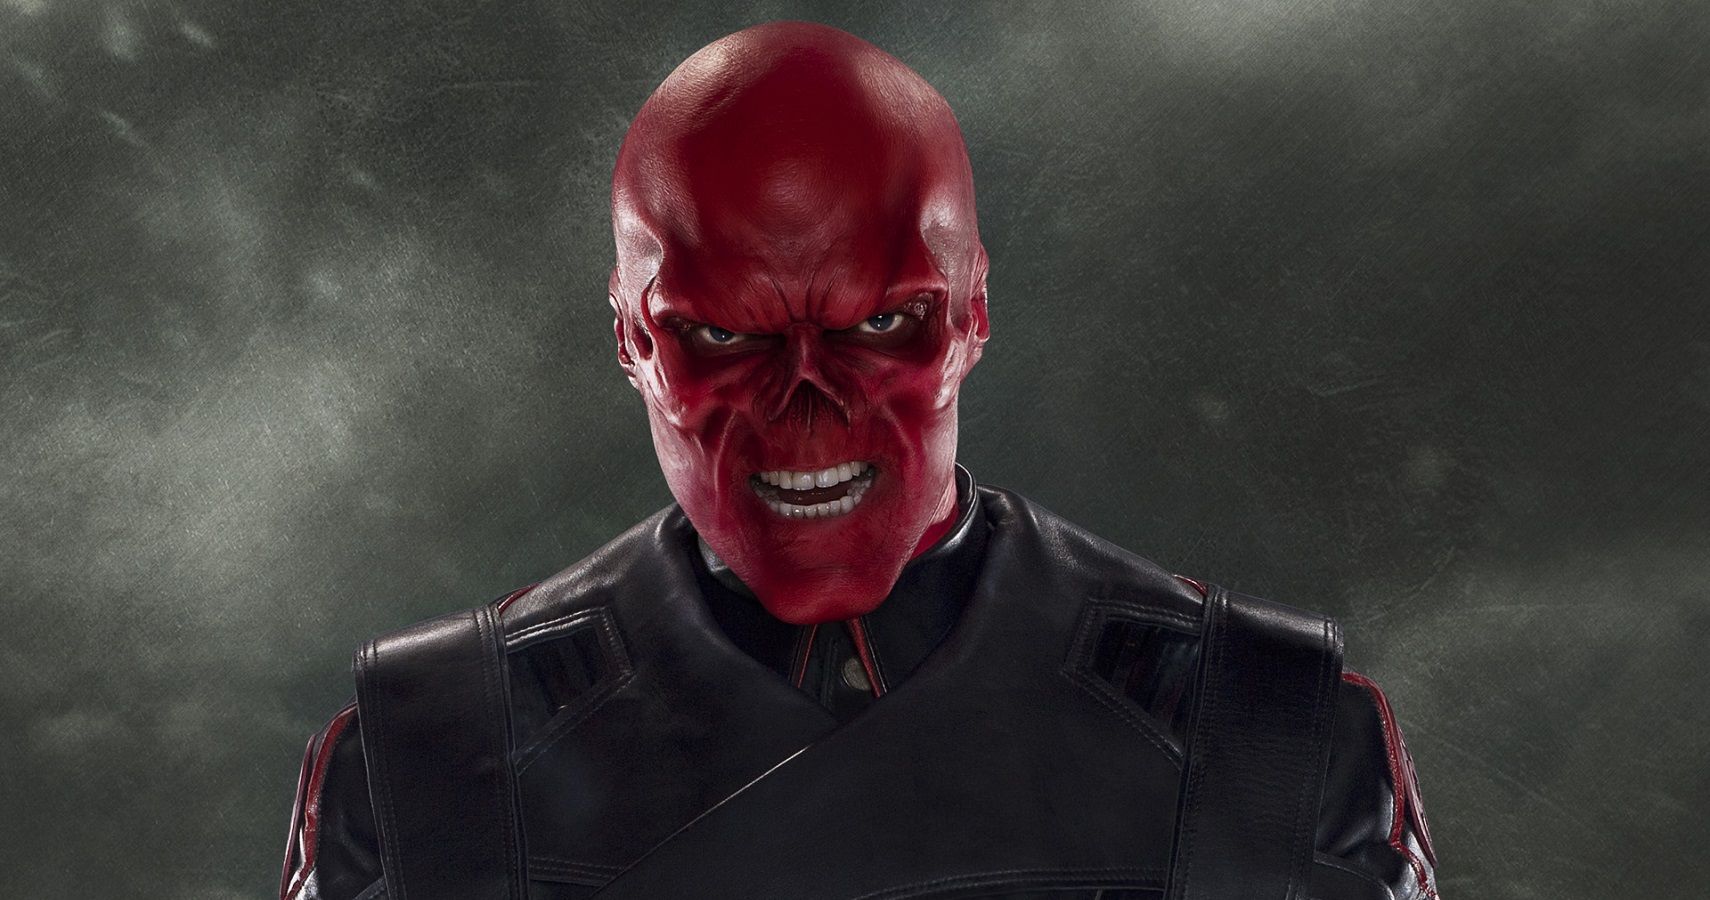 What is the Red Skull’s real name?